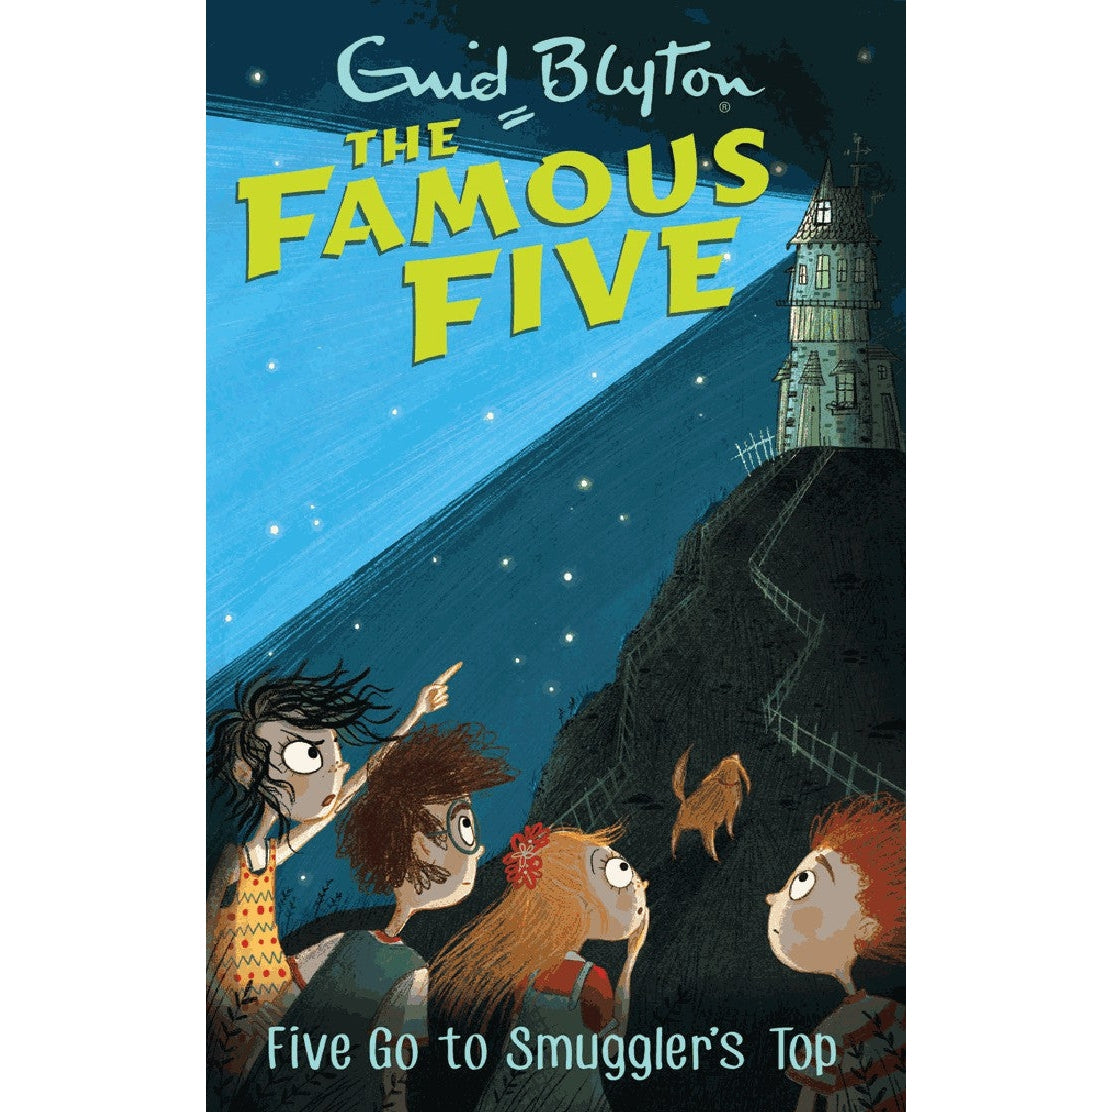 Yoto Cards - The Famous Five Collection Enid Blyton - Child Friendly Audio Story Card for the Yoto Player